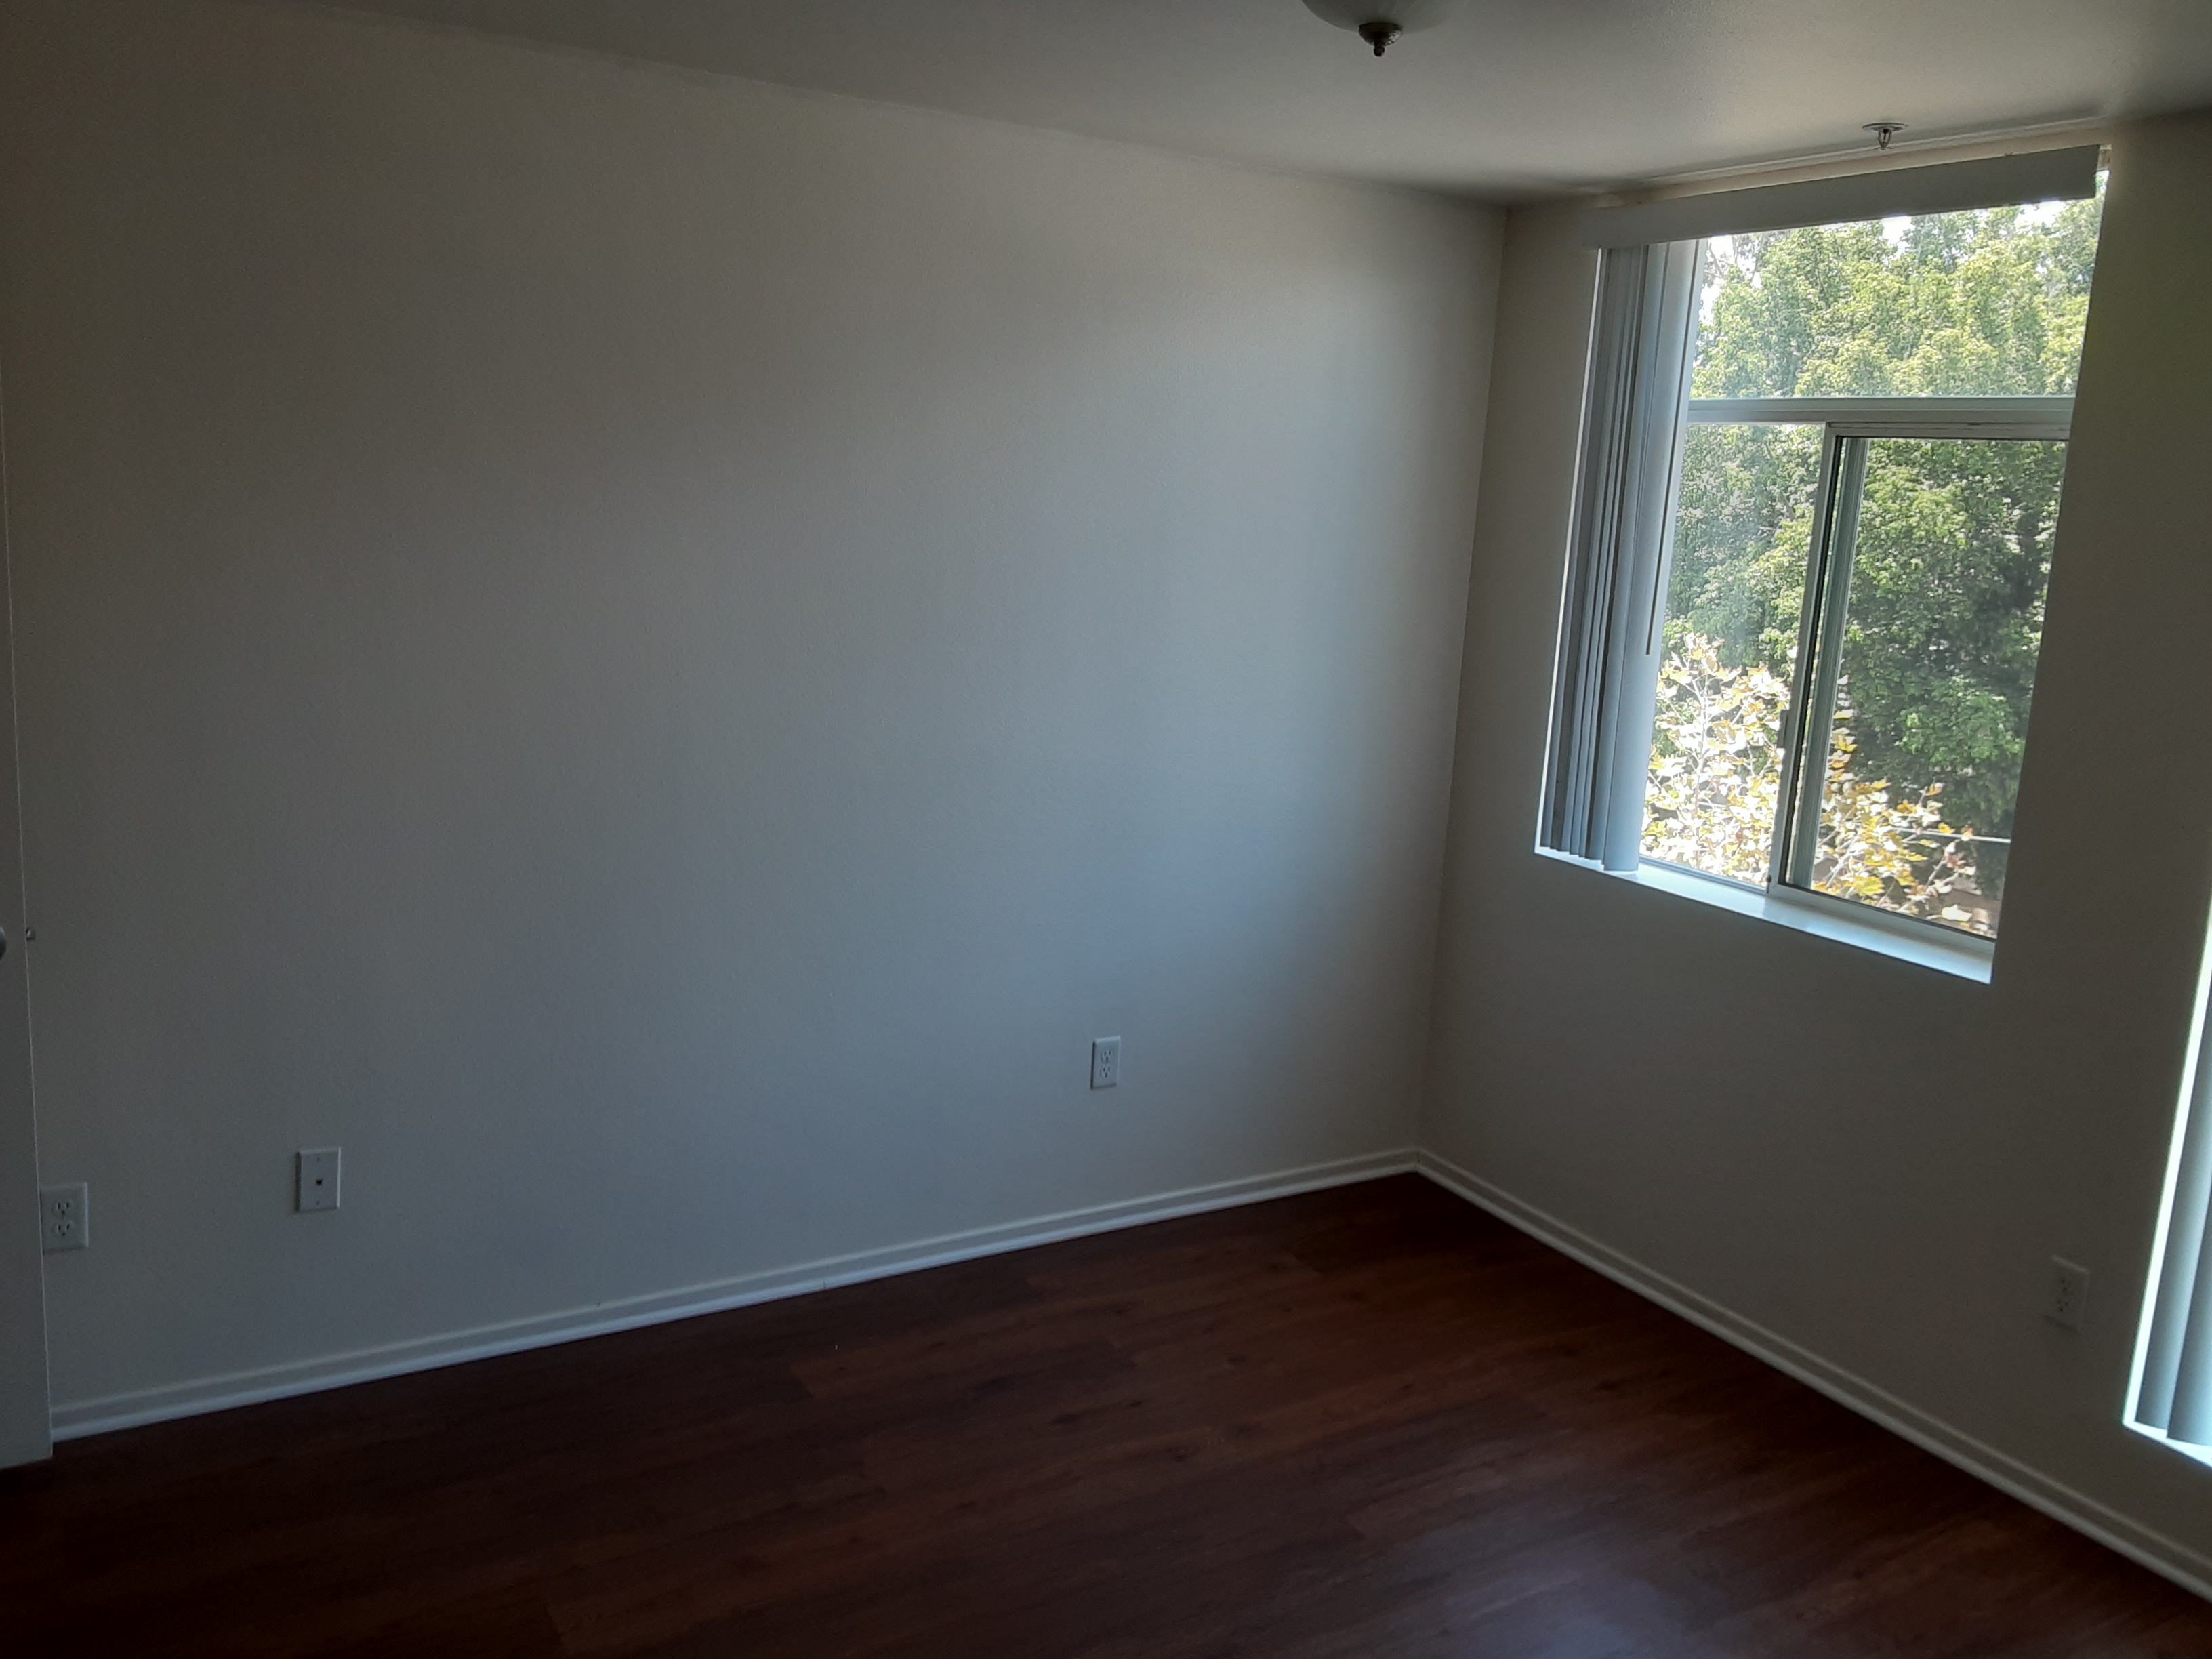 Image of the apartment bedroom